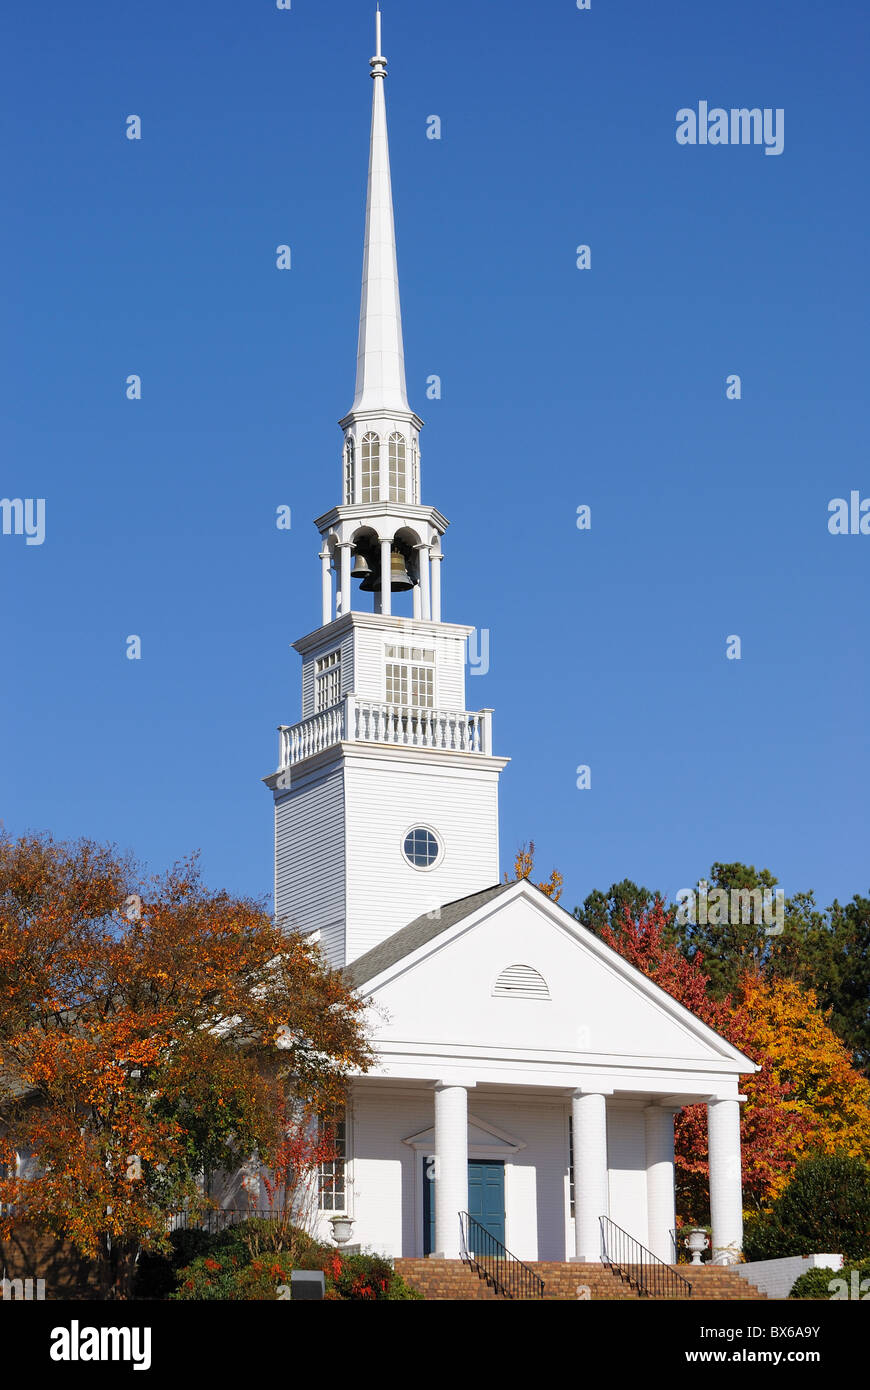 A southern Baptist Church in rural surroundings. Stock Photo